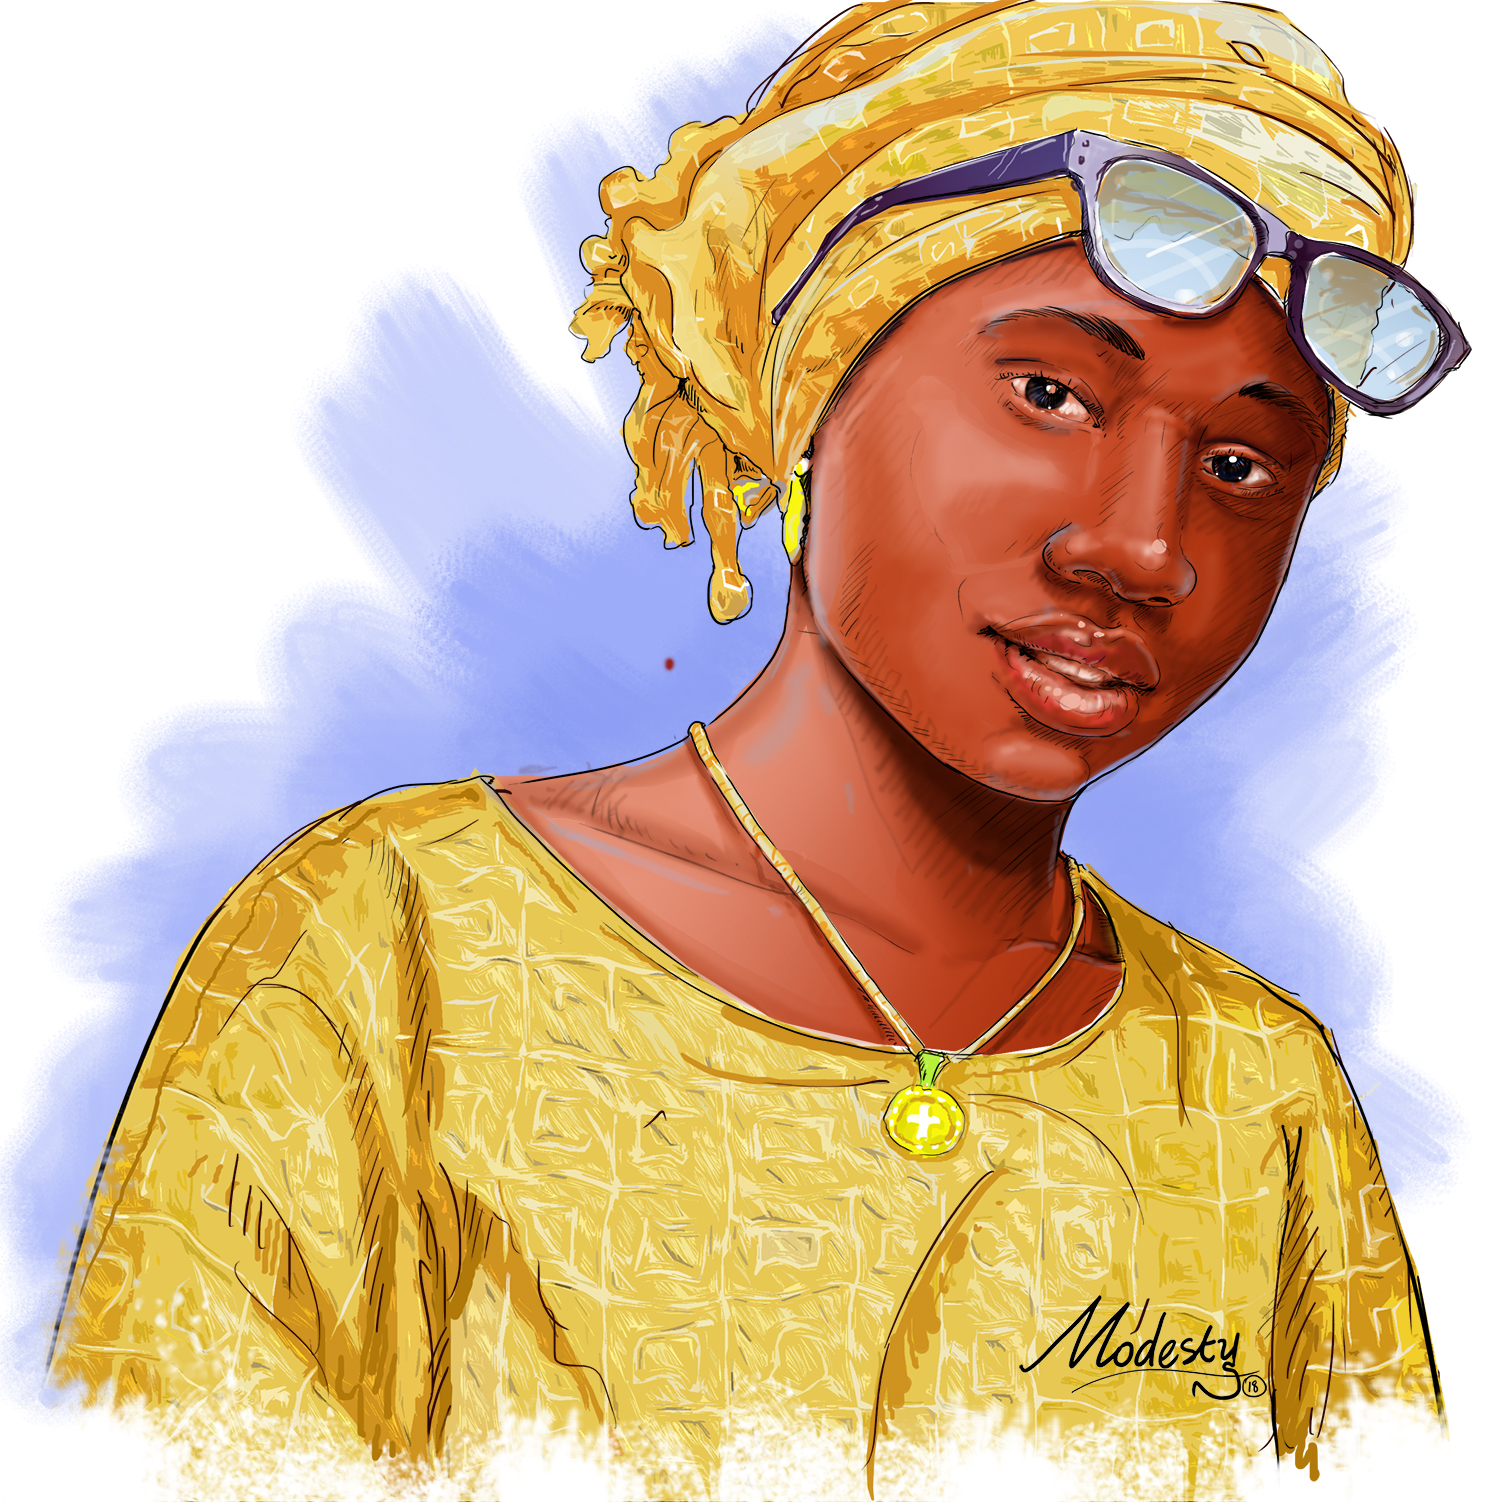 What Could Be This Prize on Leah Sharibu That the Federal Government of Nigeria Cannot Pay?